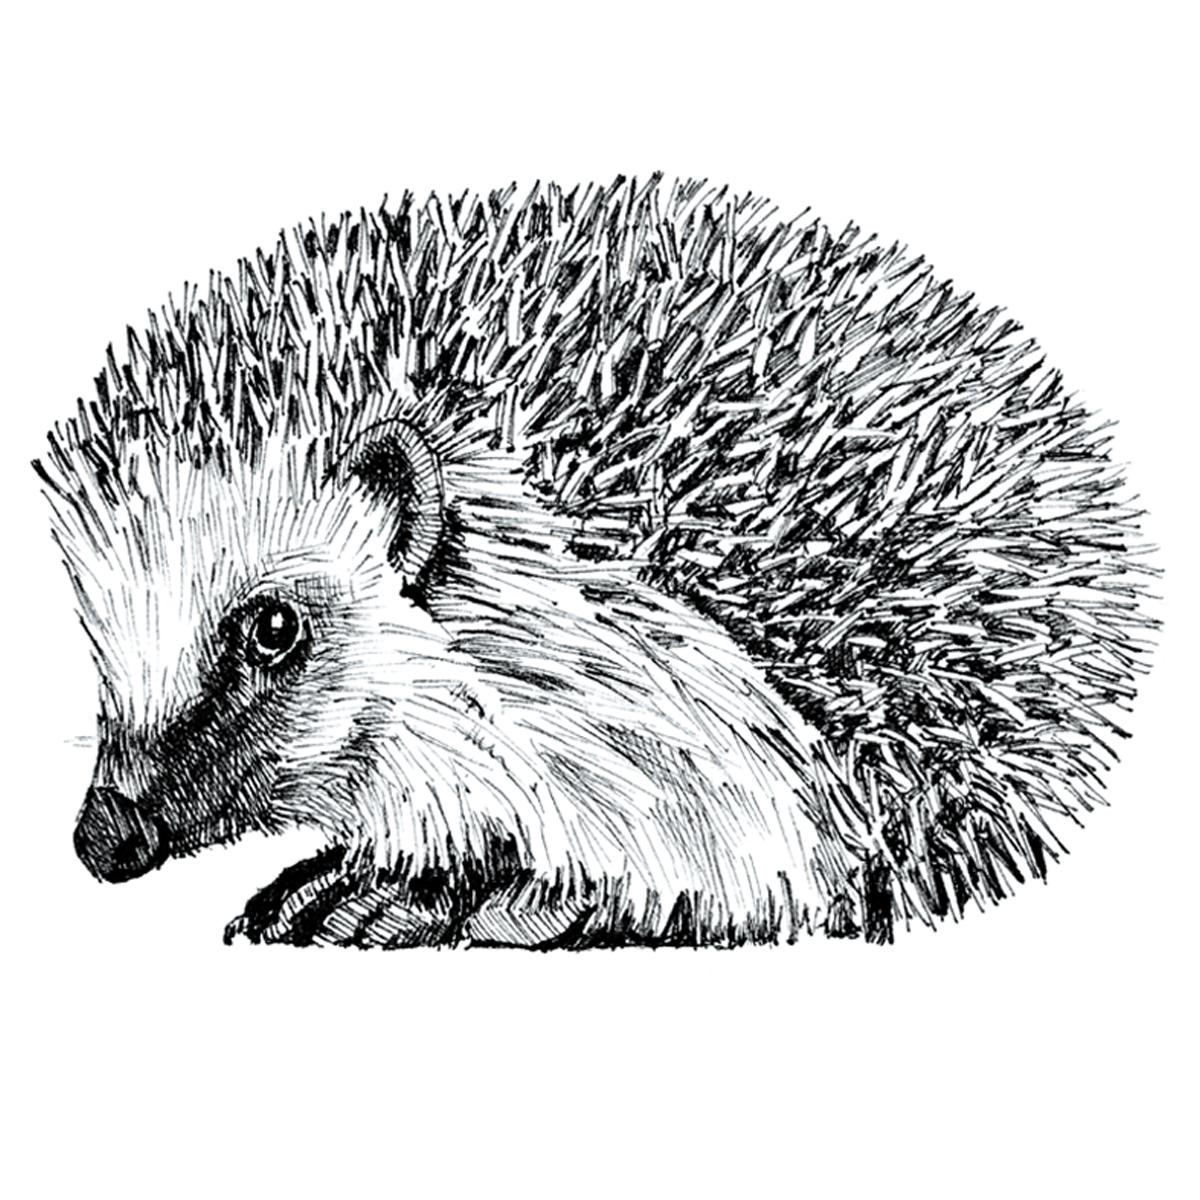 Limited edition print from pen and ink drawing of a hedgehog